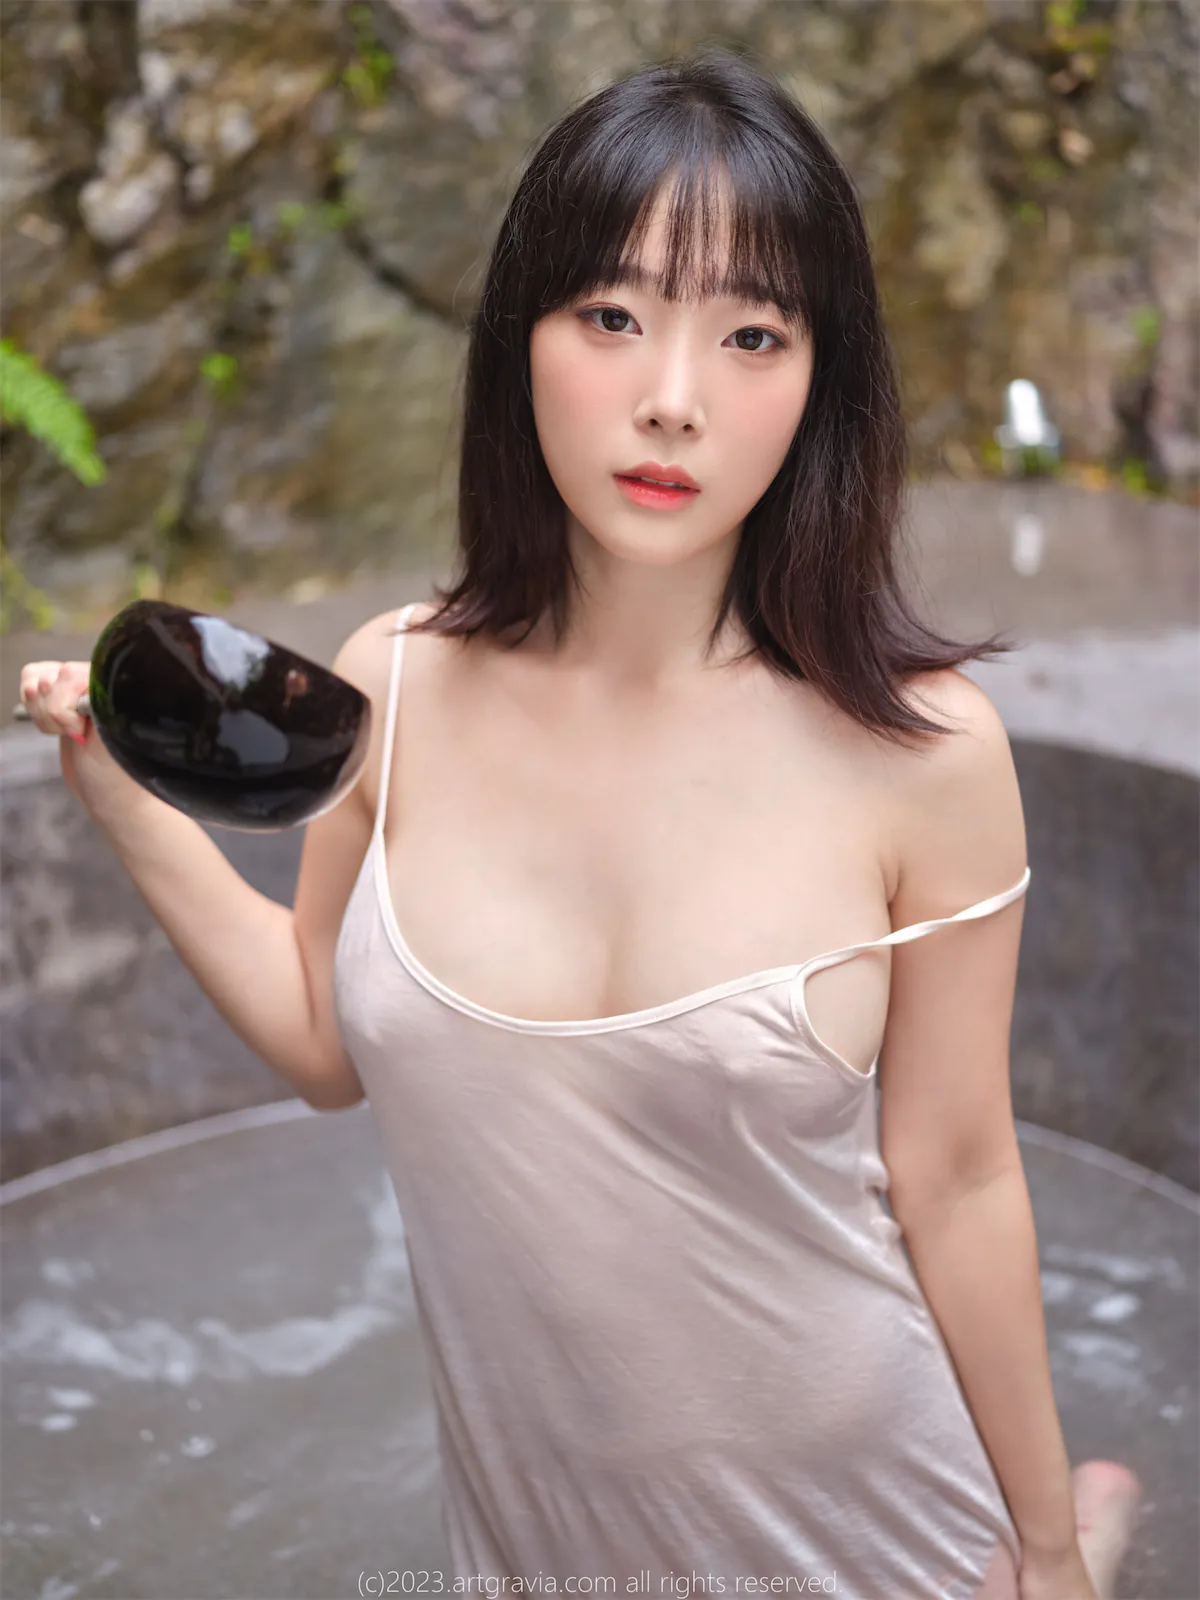 AG.492-Kang-In-kyung-coszip.com-017